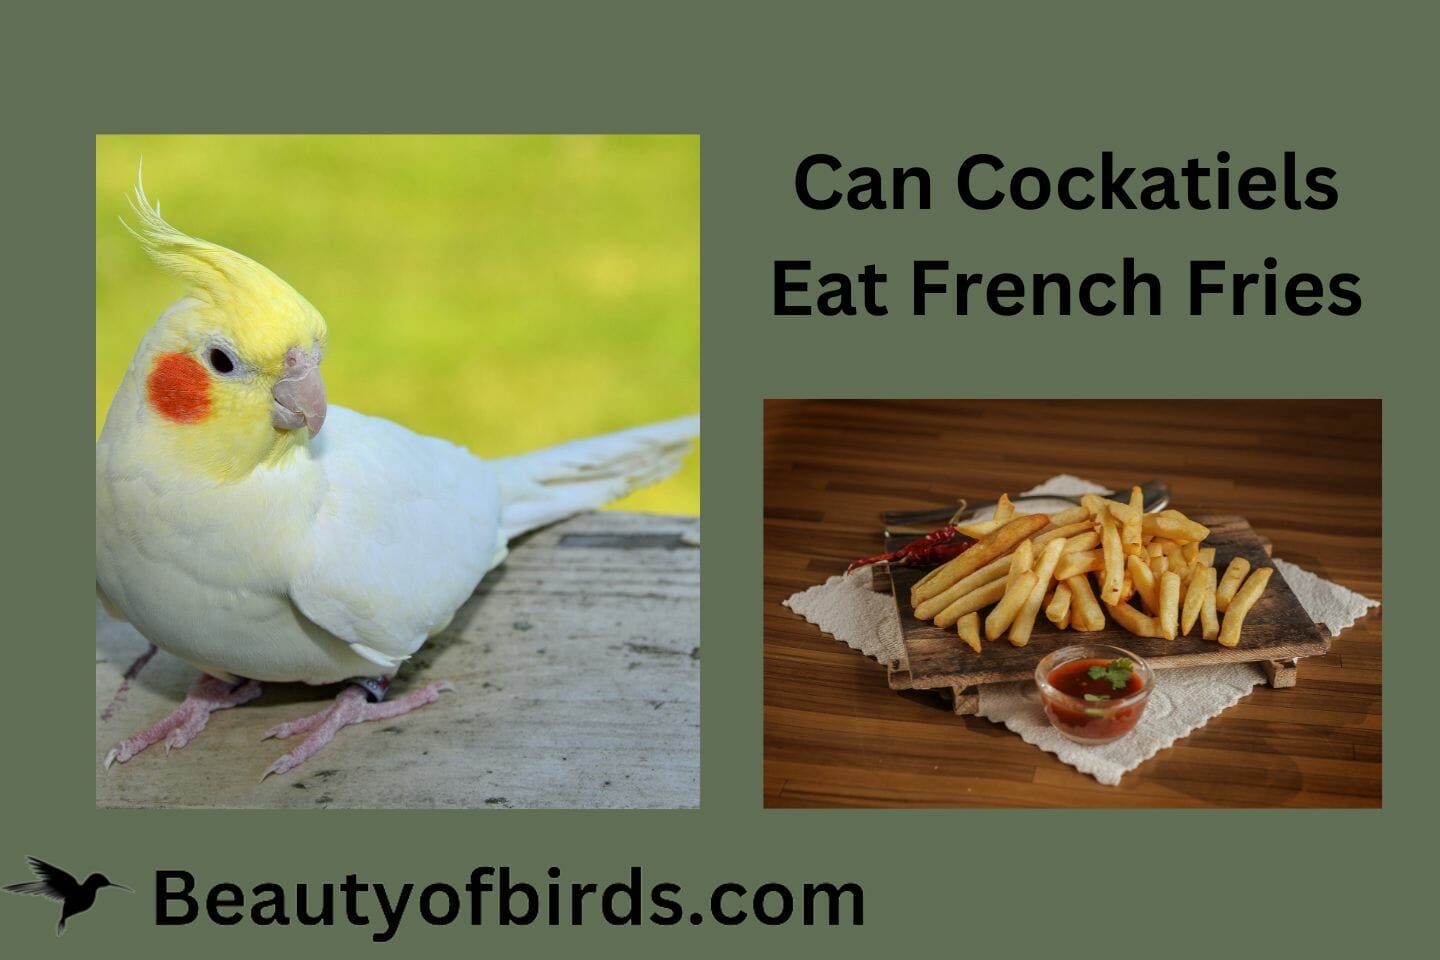 Can Cockatiels Eat French Fries